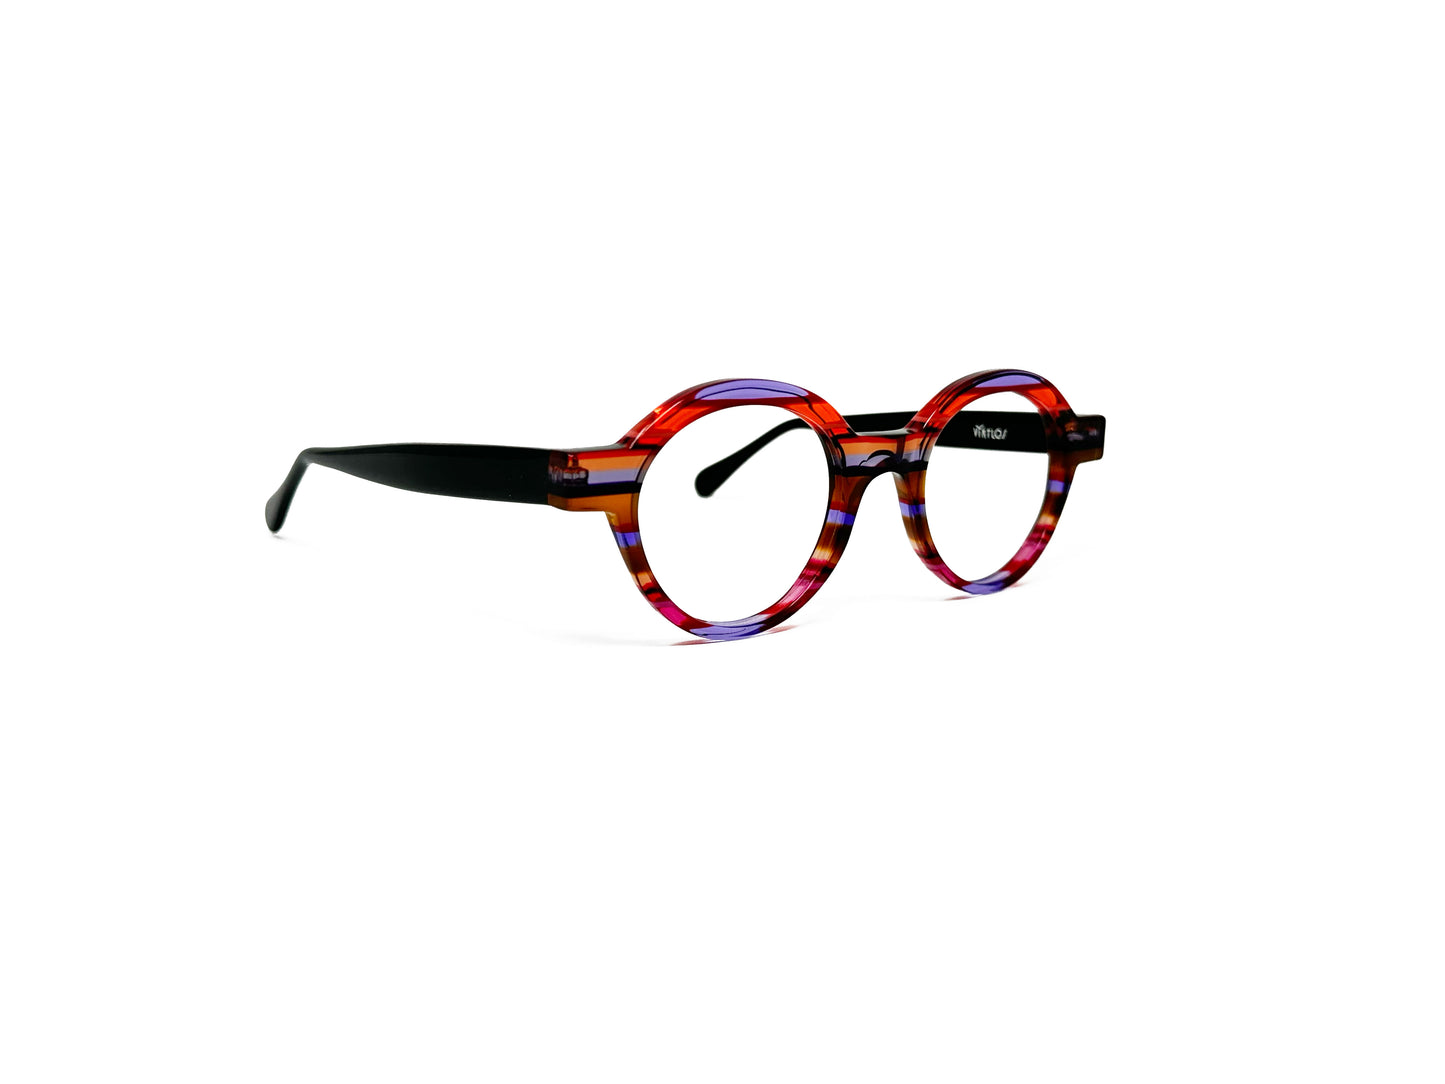 Viktlos round acetate optical frame. Model: 2969. Color: 1776/35 - Purple, red, and pink transparent stripes. Side view.